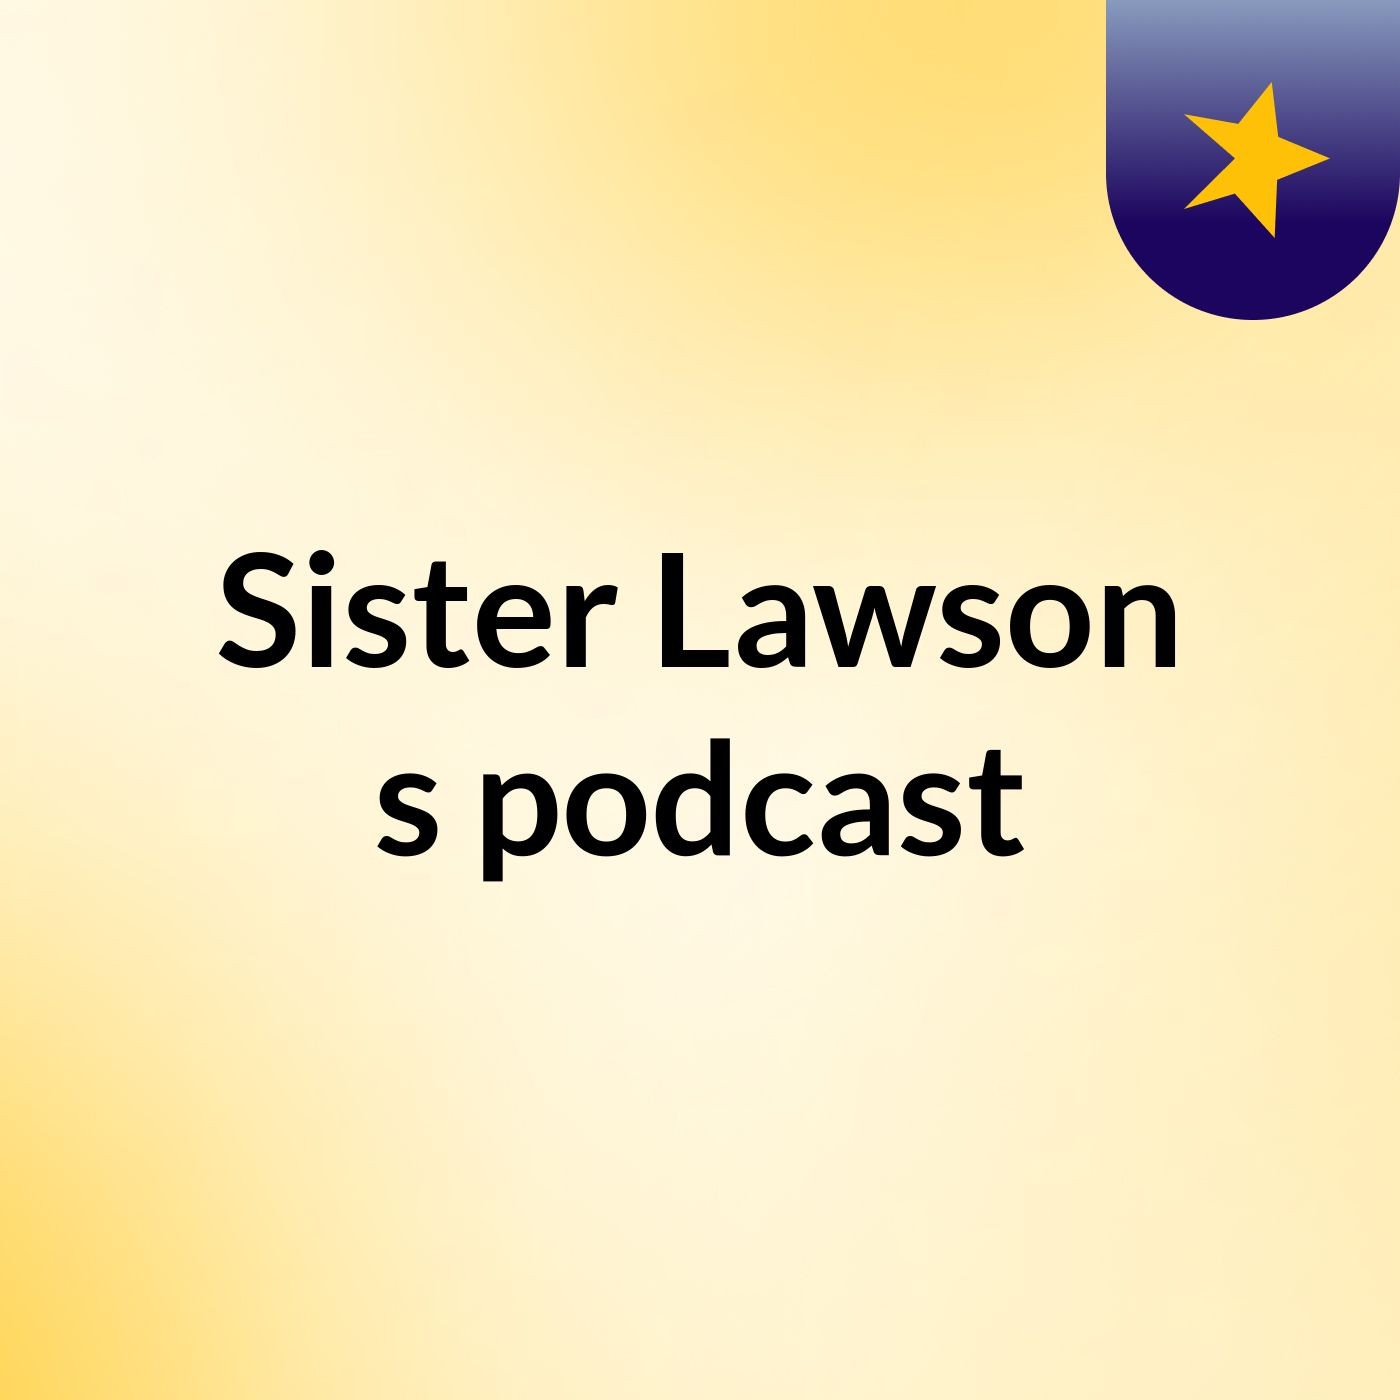 Sister Lawson's podcast